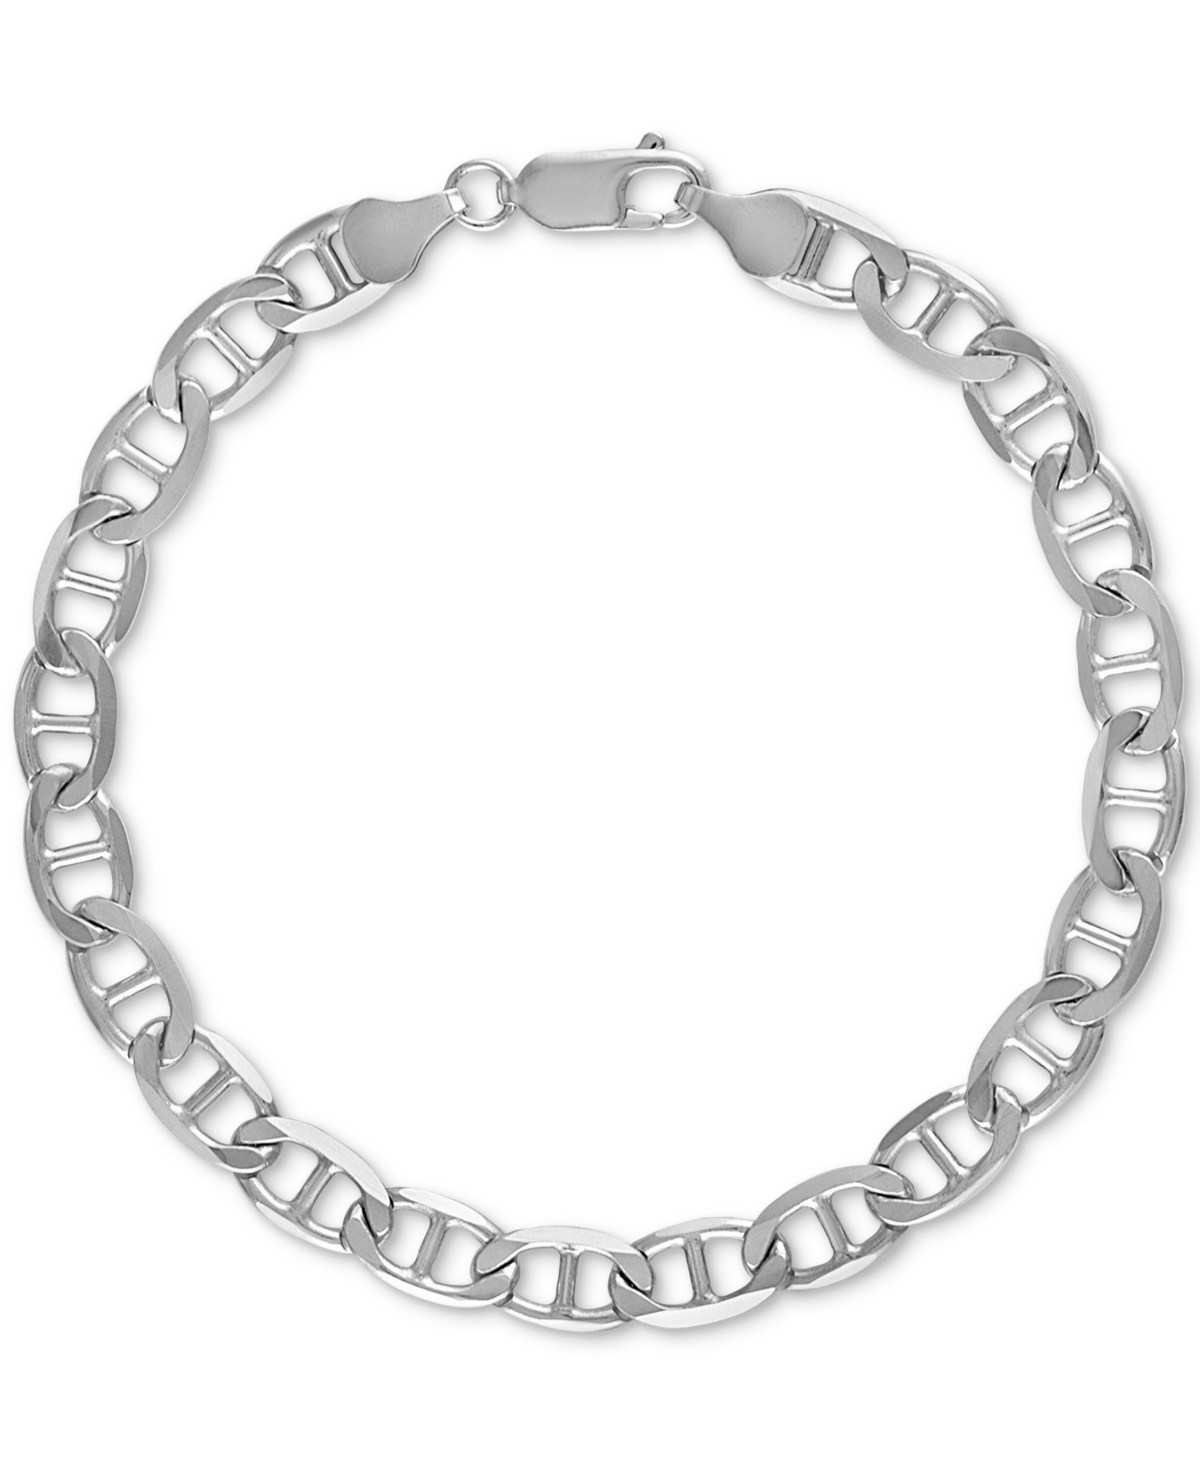 Esquire Men's Jewelry Flat Mariner Link Chain Bracelet In Sterling Silver, Created For Macy's